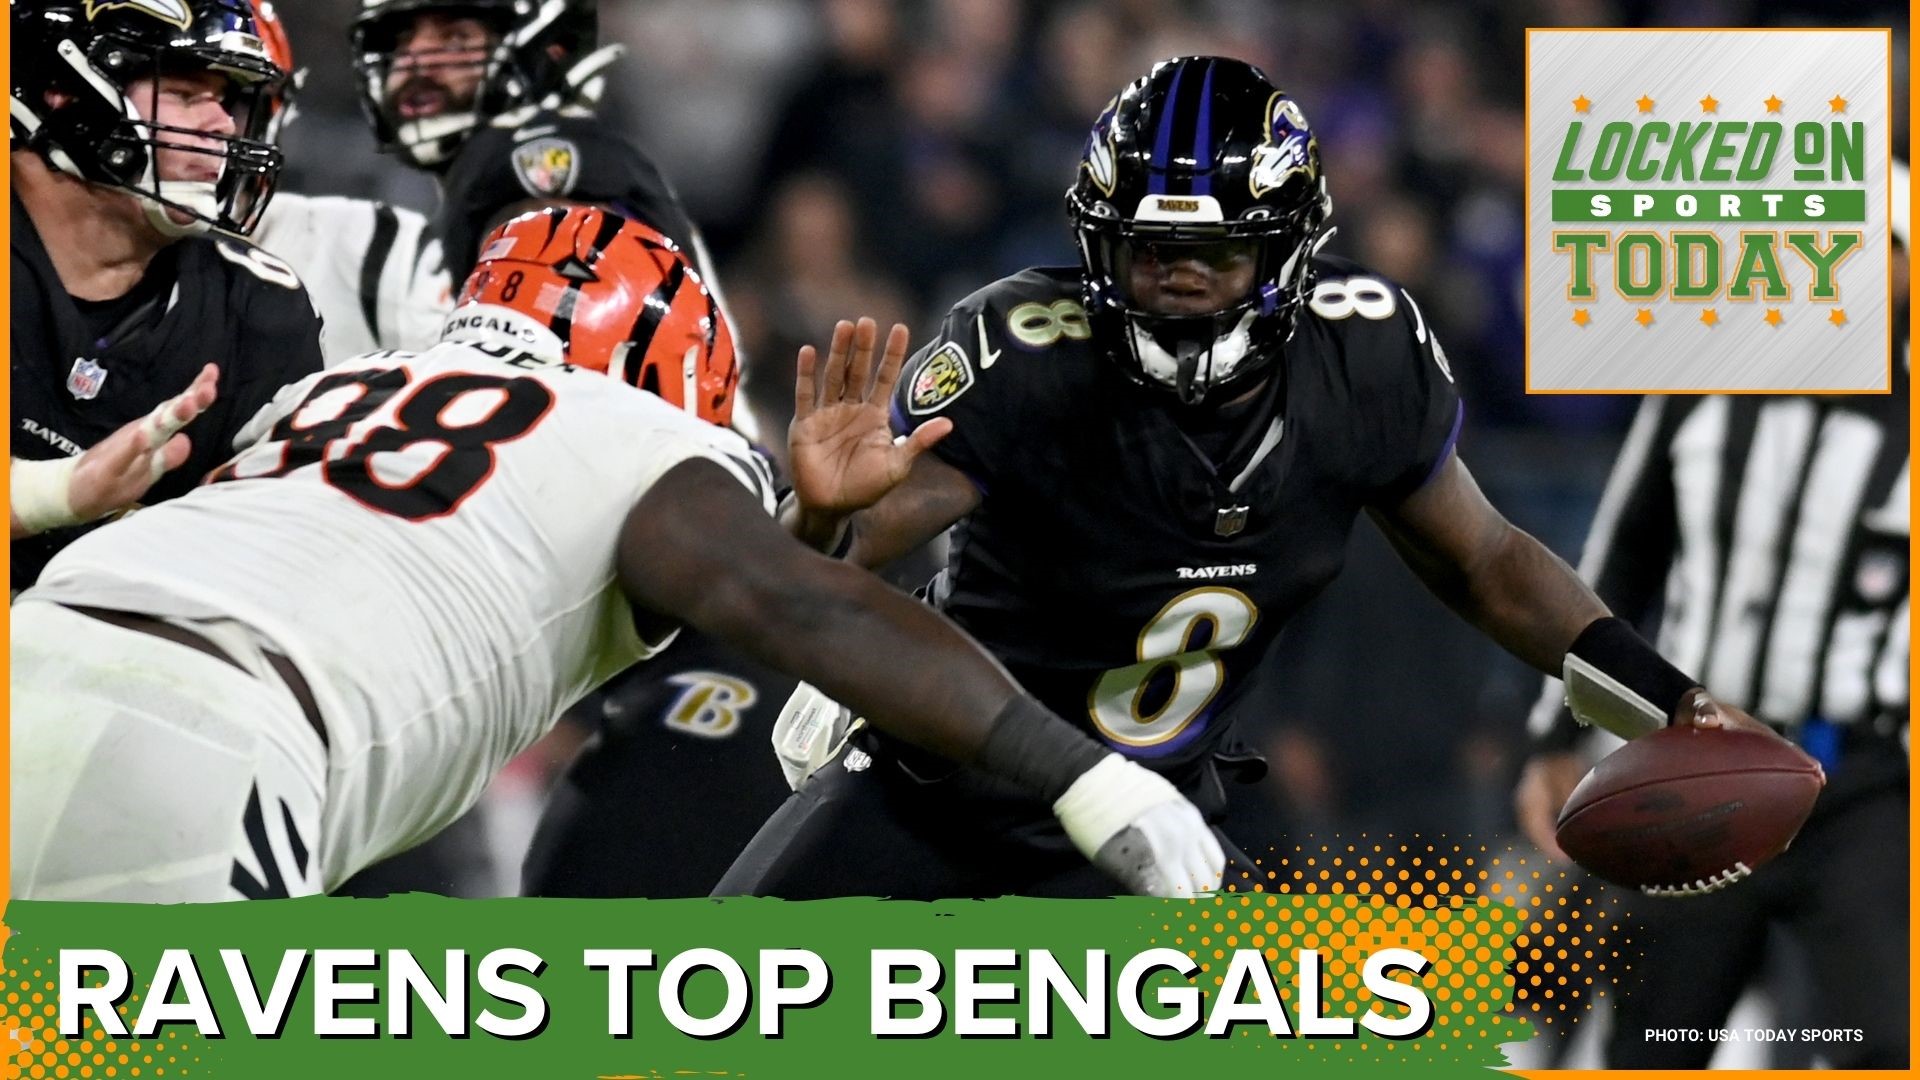 Discussing the day's top sports stories from the Ravens beat the Bengals in a game full injuries and bad calls to the A's have permission to leave Oakland.